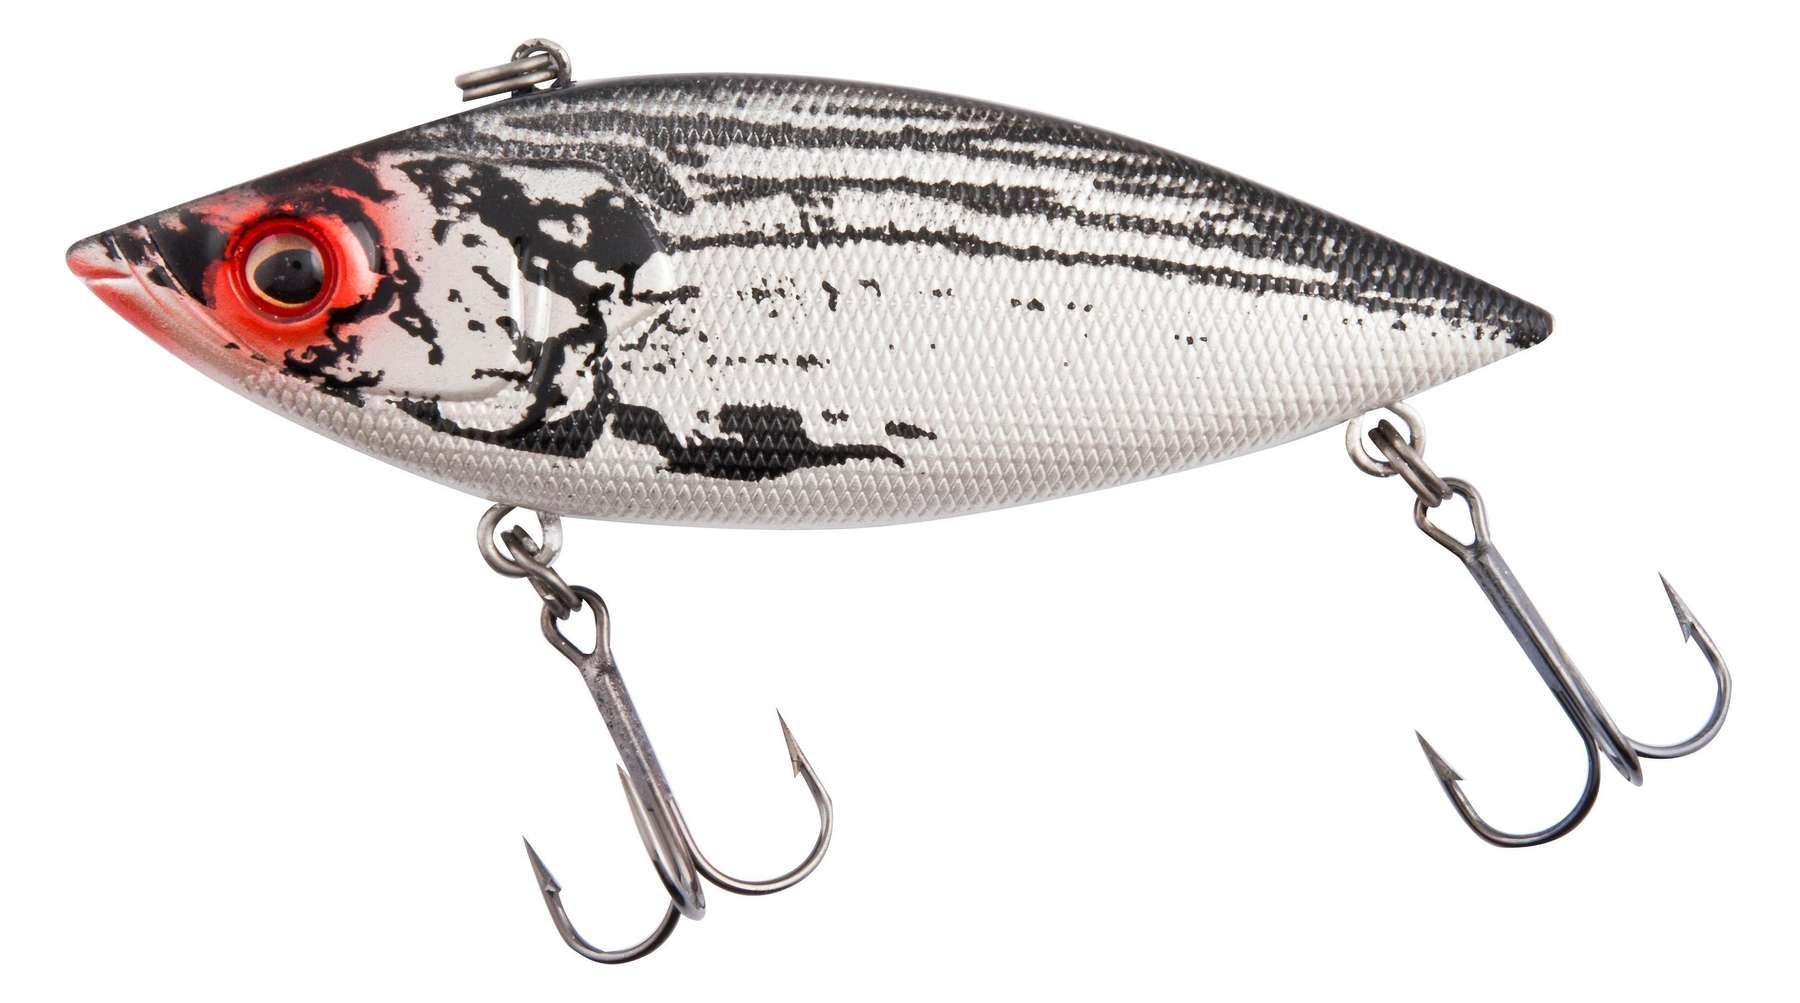 https://www.outdoorshopping.com/pimages/hurricane-shad-fatal-attraction-fishing-lure-hook-1-ounce-salt-water-130994494537936699.jpg